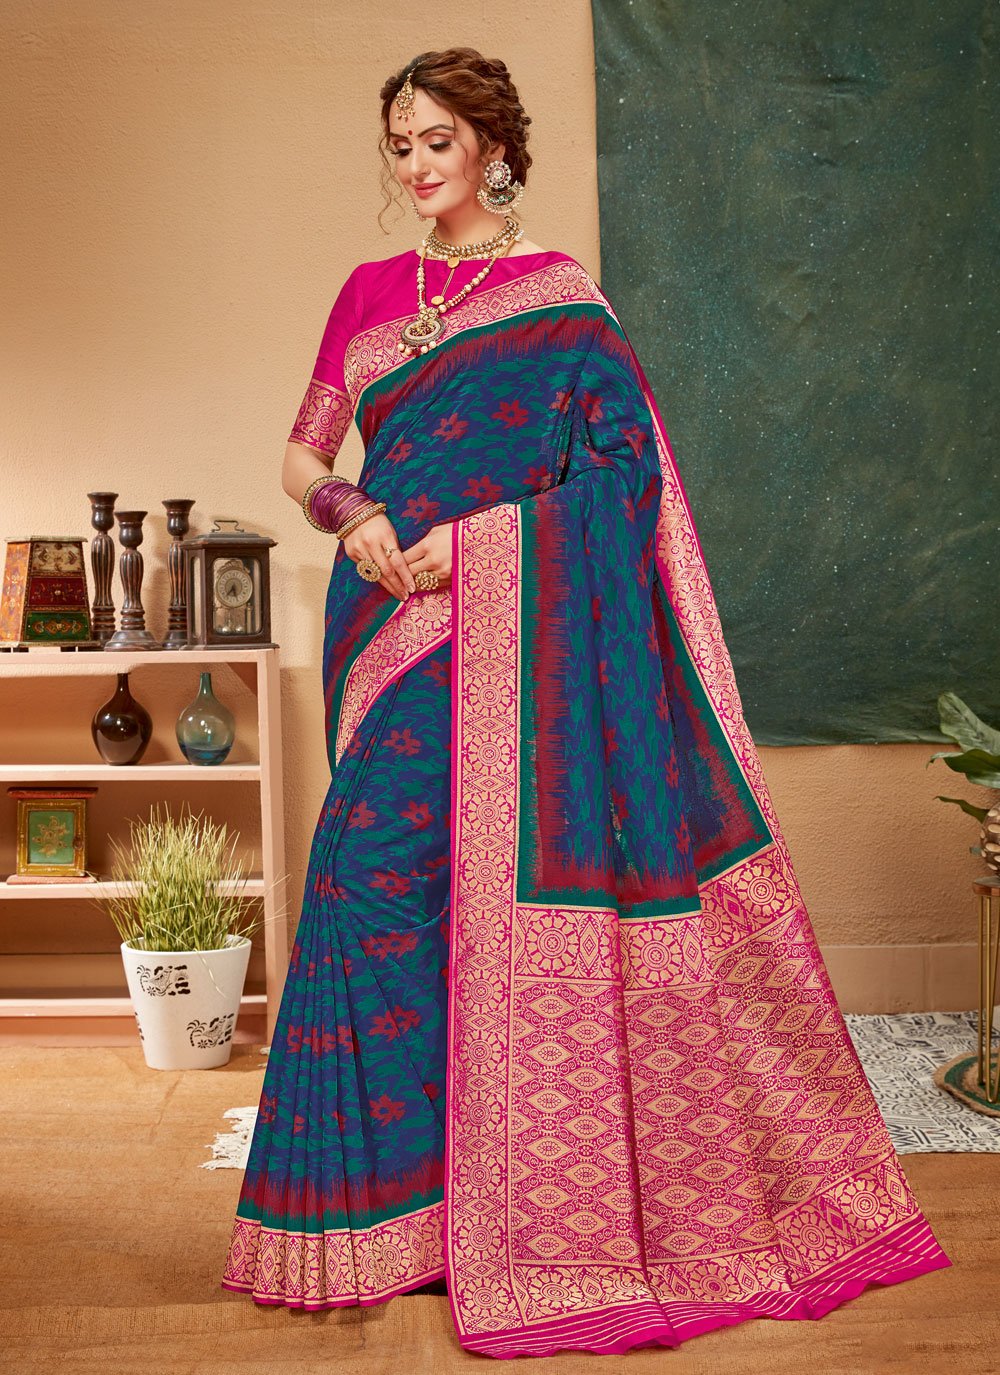 Engagement Sarees: Shop Sarees for Engagement Online at Indian Cloth Store